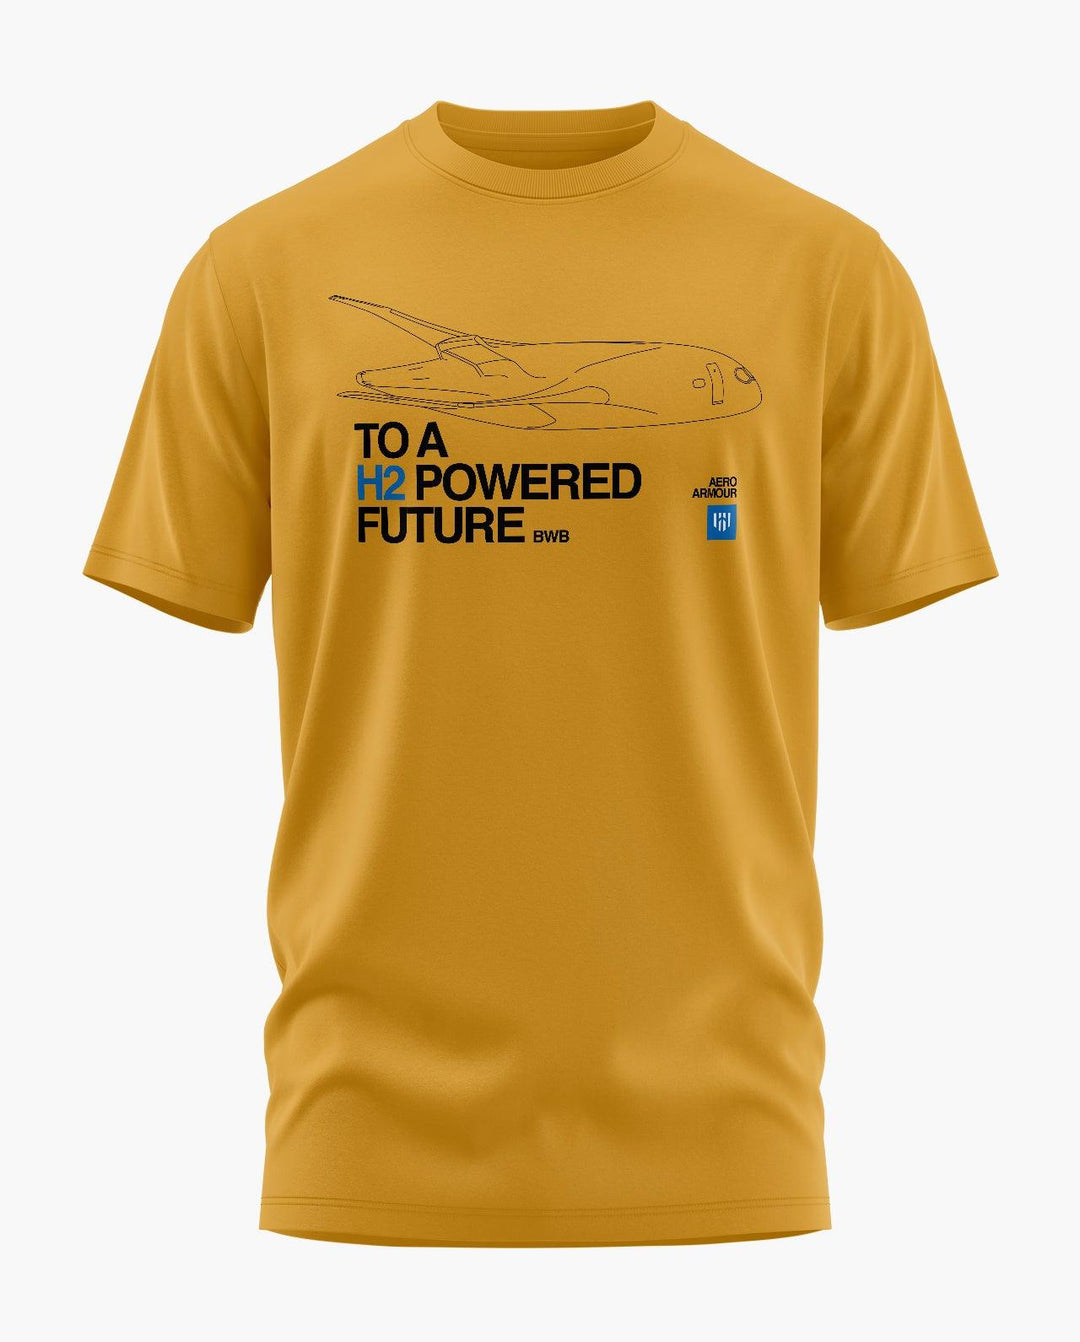 To a Hydrogen Powered Future T-Shirt - Aero Armour